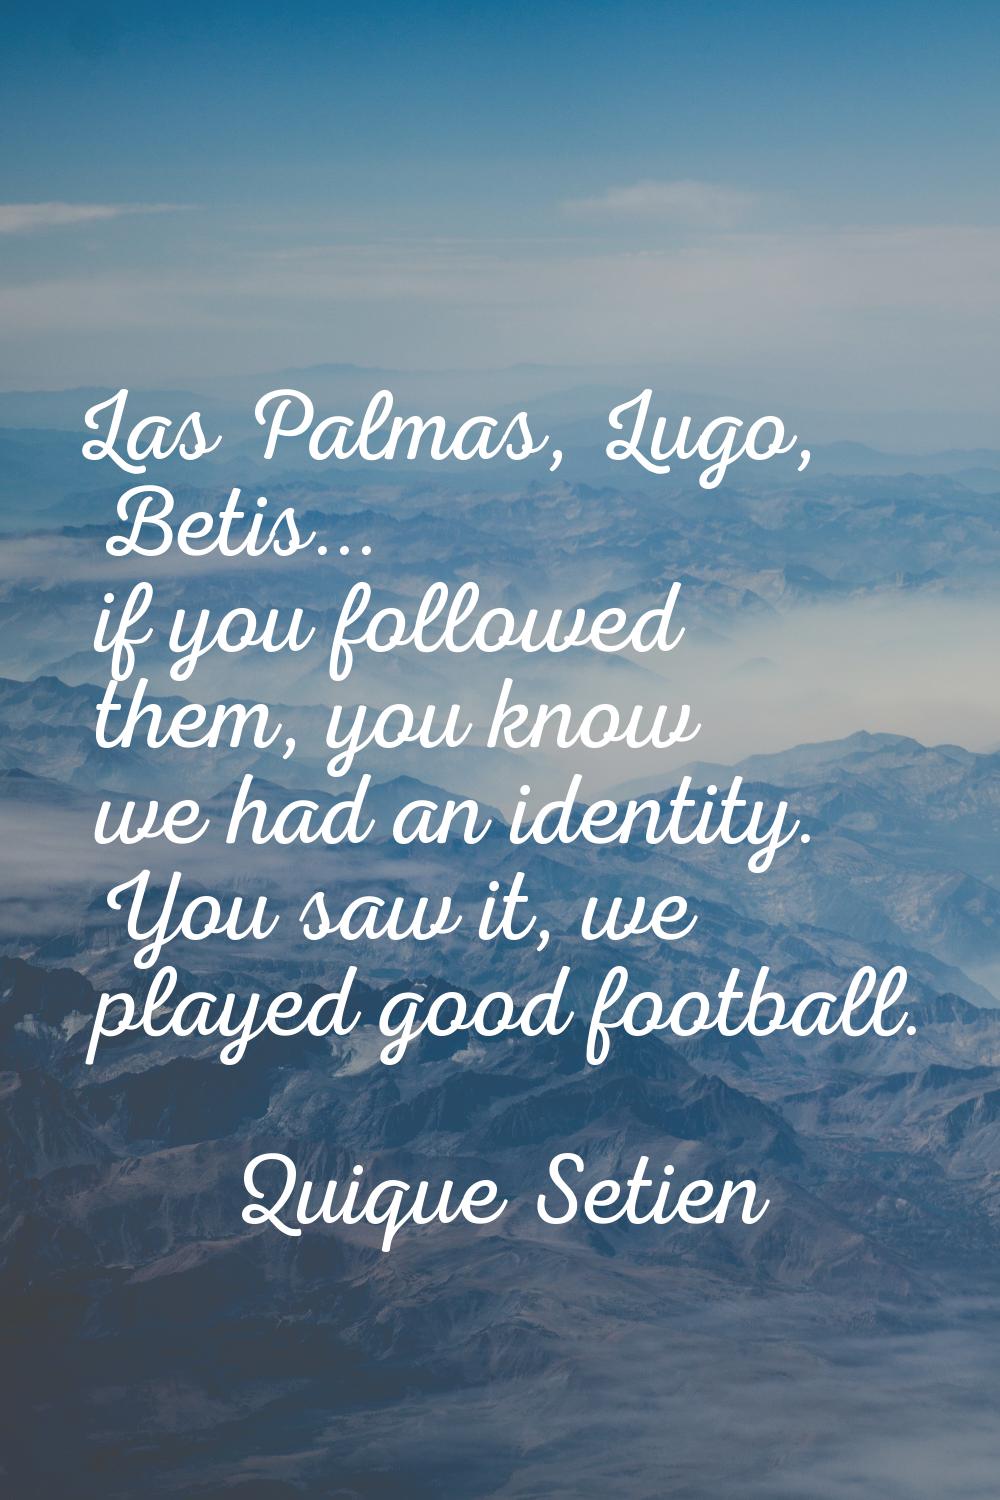 Las Palmas, Lugo, Betis... if you followed them, you know we had an identity. You saw it, we played